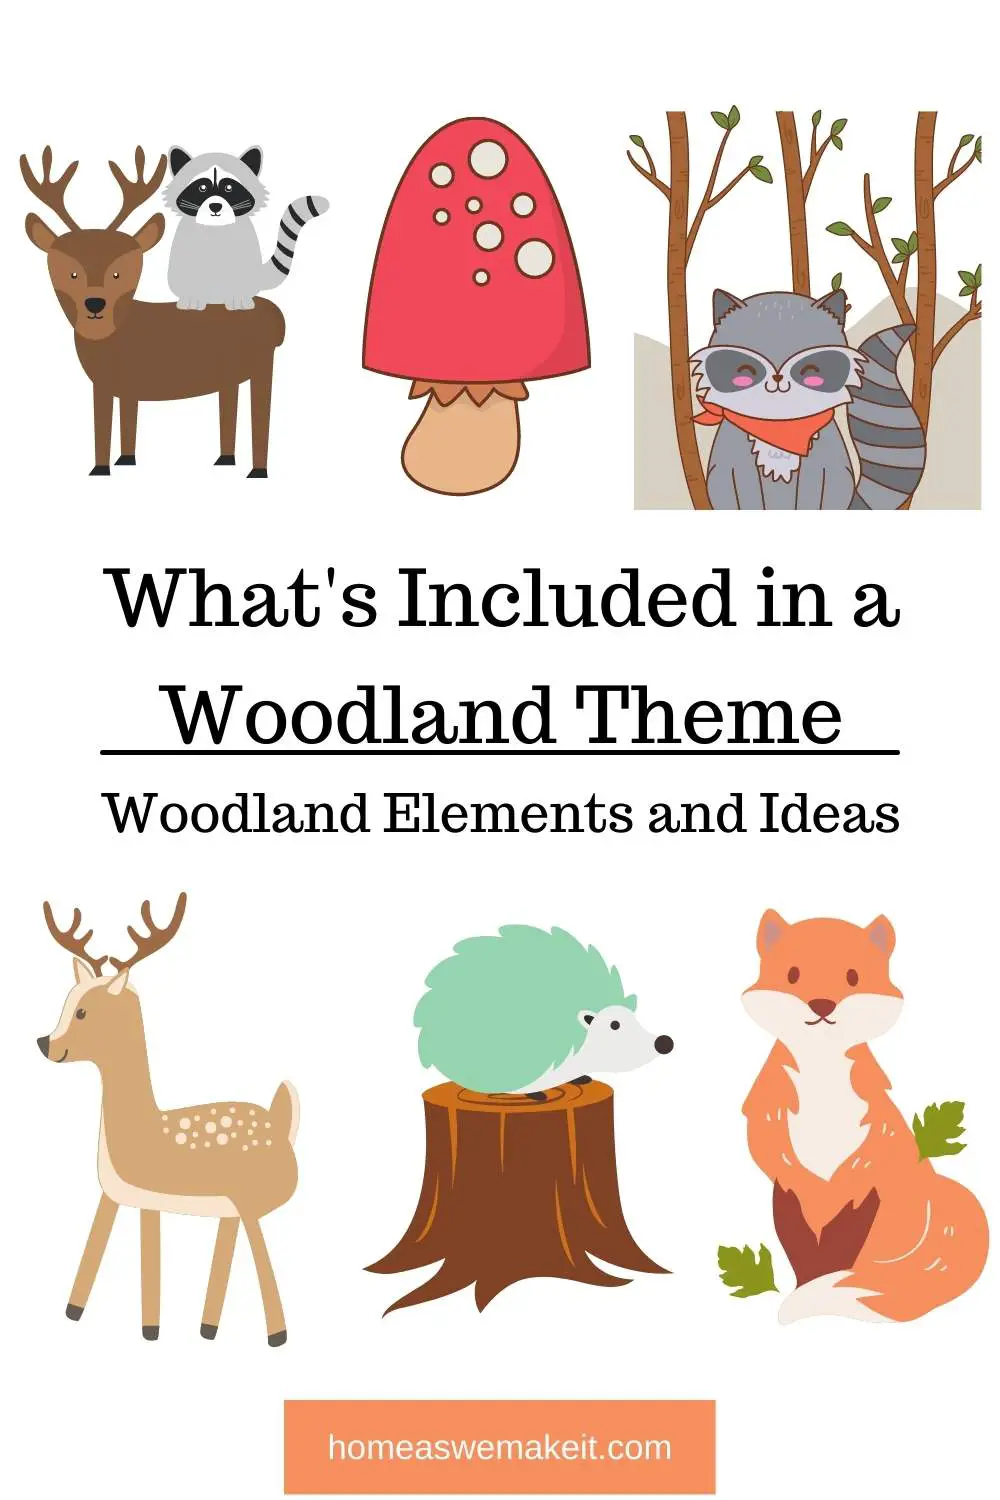 What Is Included In a Woodland Theme?: Woodland Theme Explained With Examples